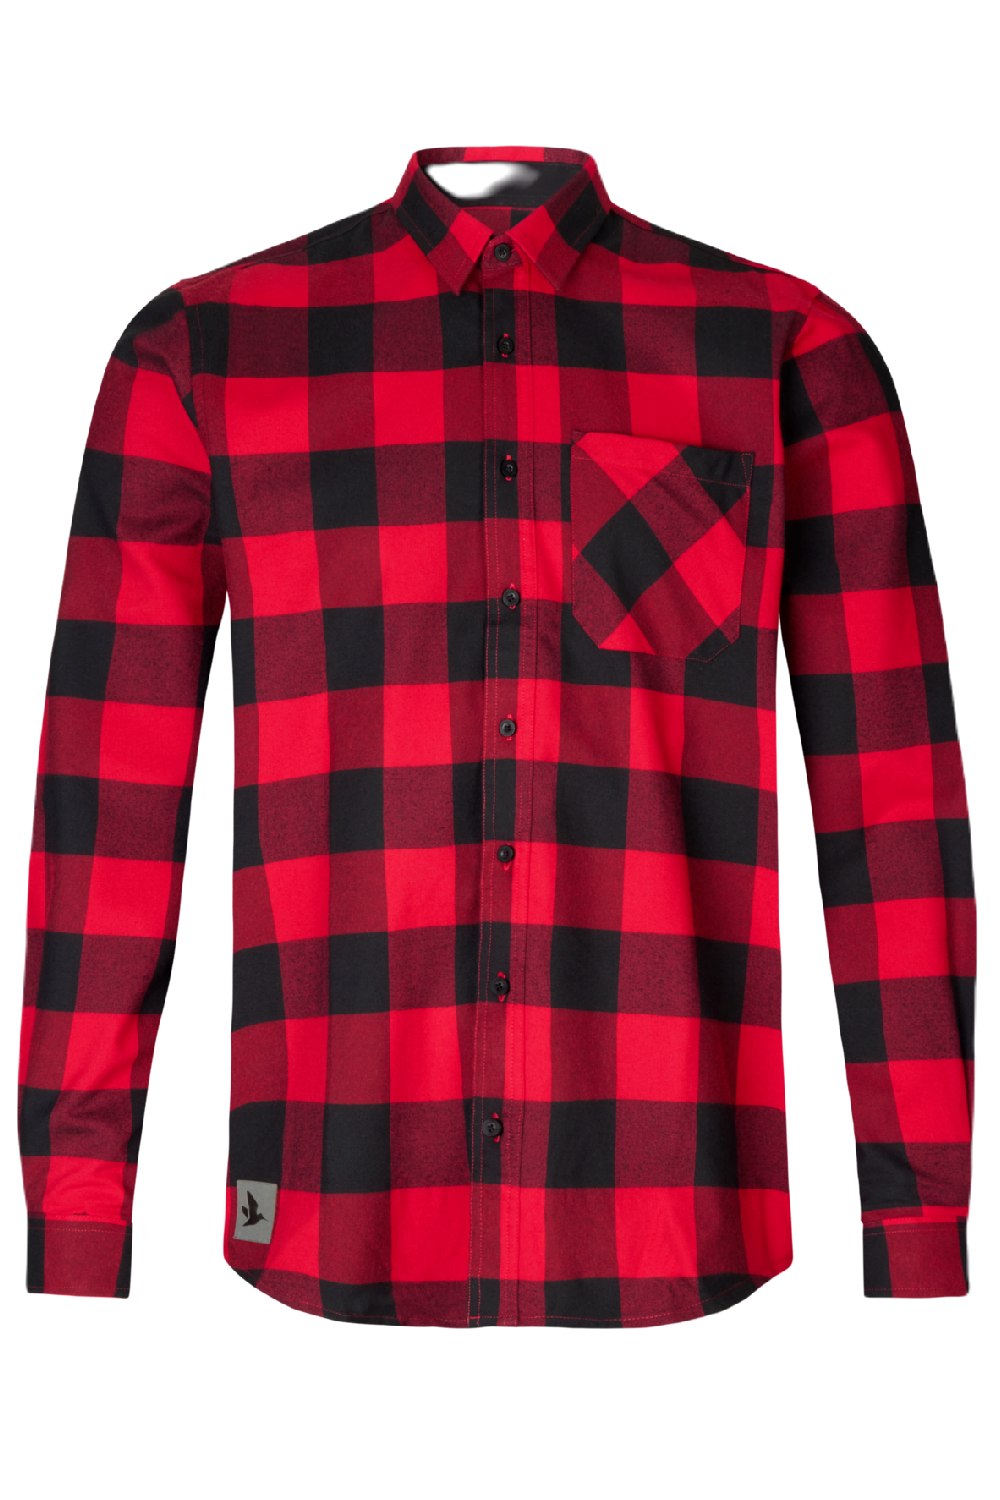 Seeland Toronto Shirt in Red Check 